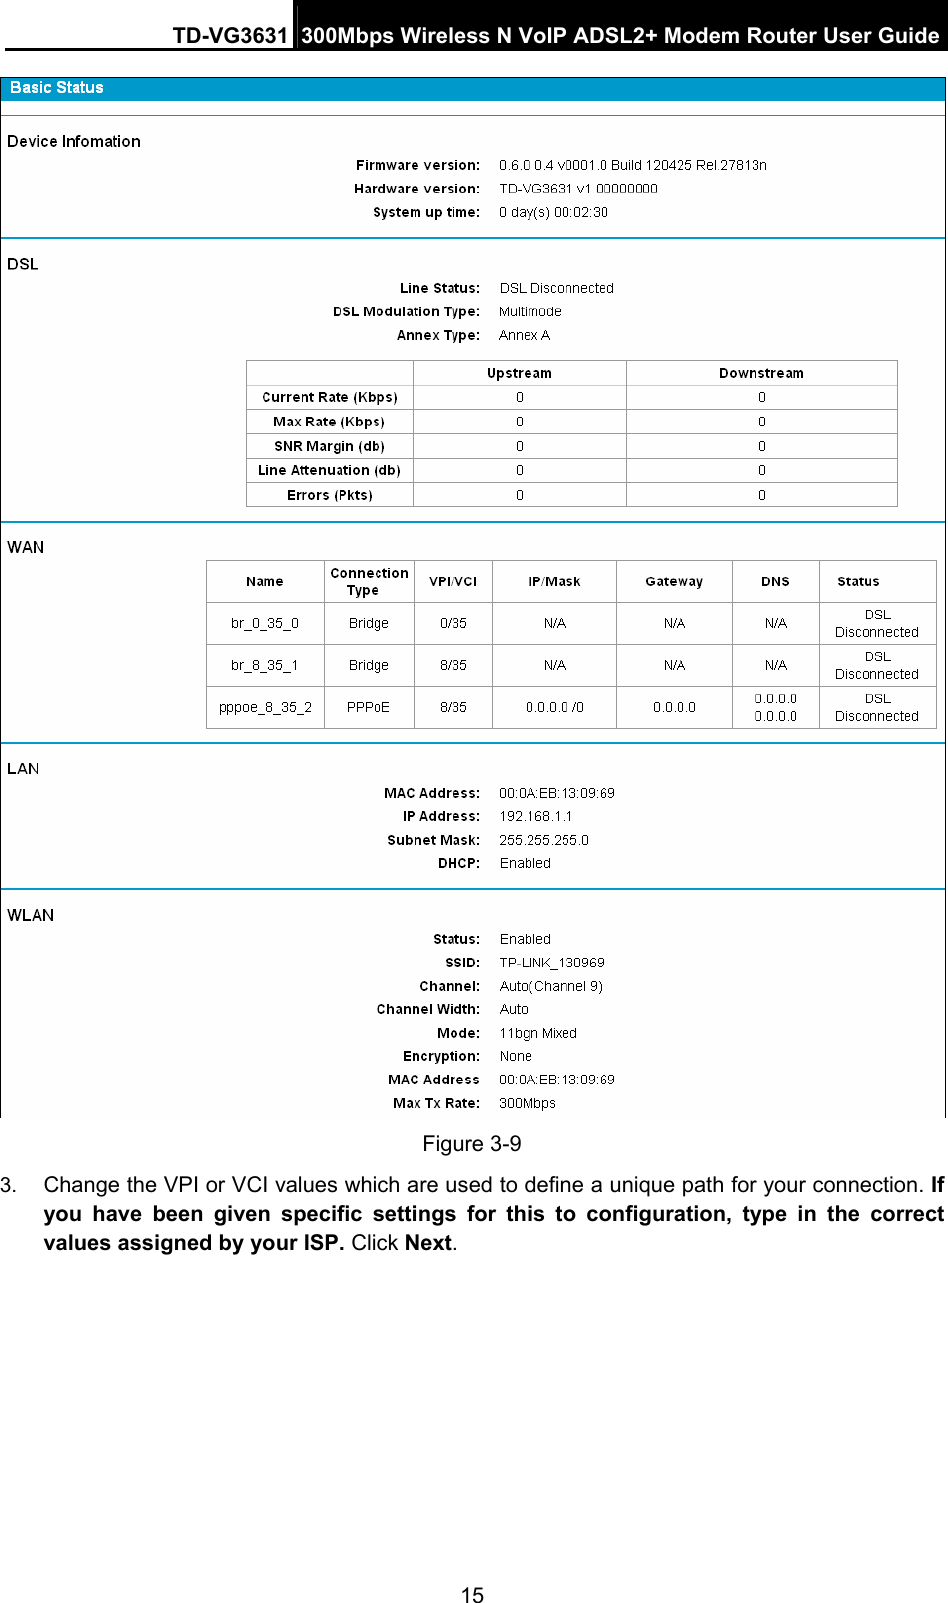 TD-VG3631 300Mbps Wireless N VoIP ADSL2+ Modem Router User Guide 15  Figure 3-9 3.  Change the VPI or VCI values which are used to define a unique path for your connection. If you have been given specific settings for this to configuration, type in the correct values assigned by your ISP. Click Next. 